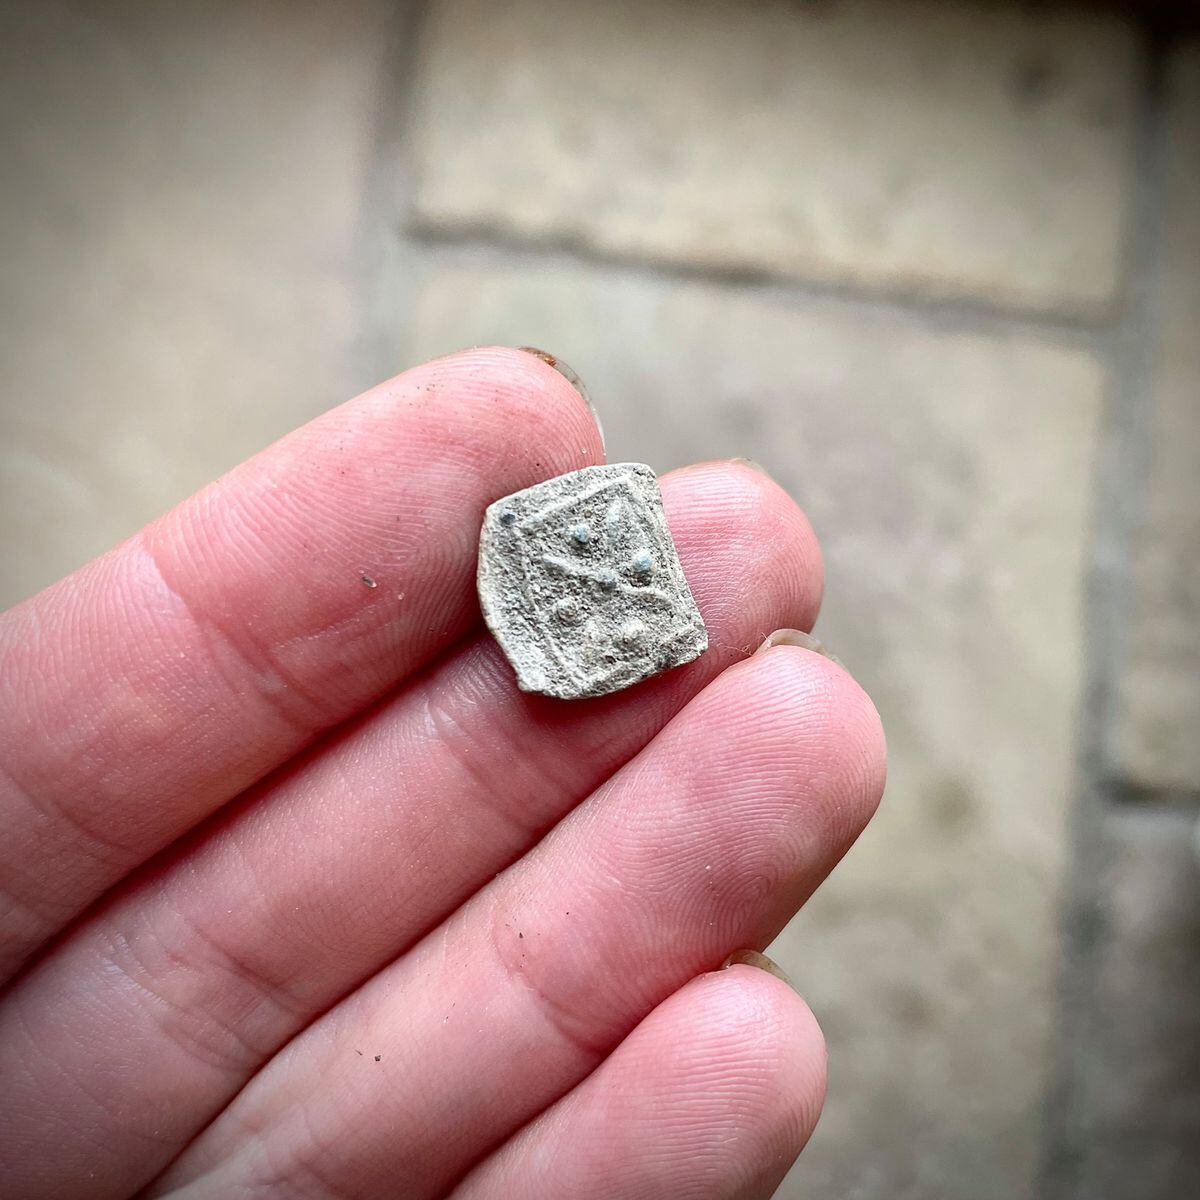 One of the tiny finds 